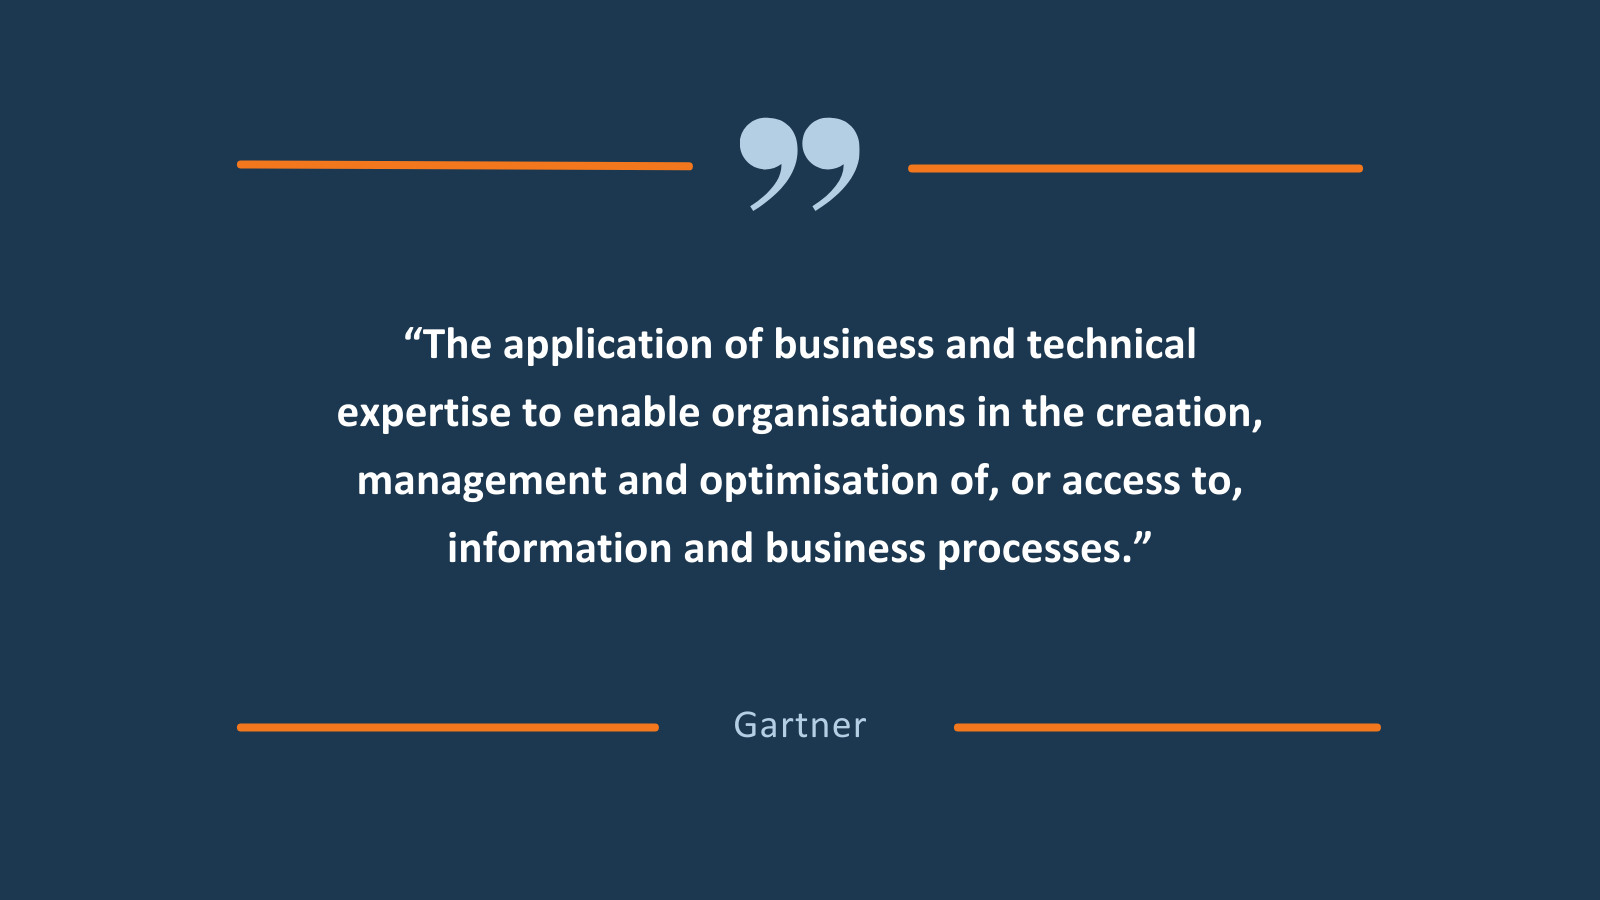 Quote from Gartner defining IT services spending